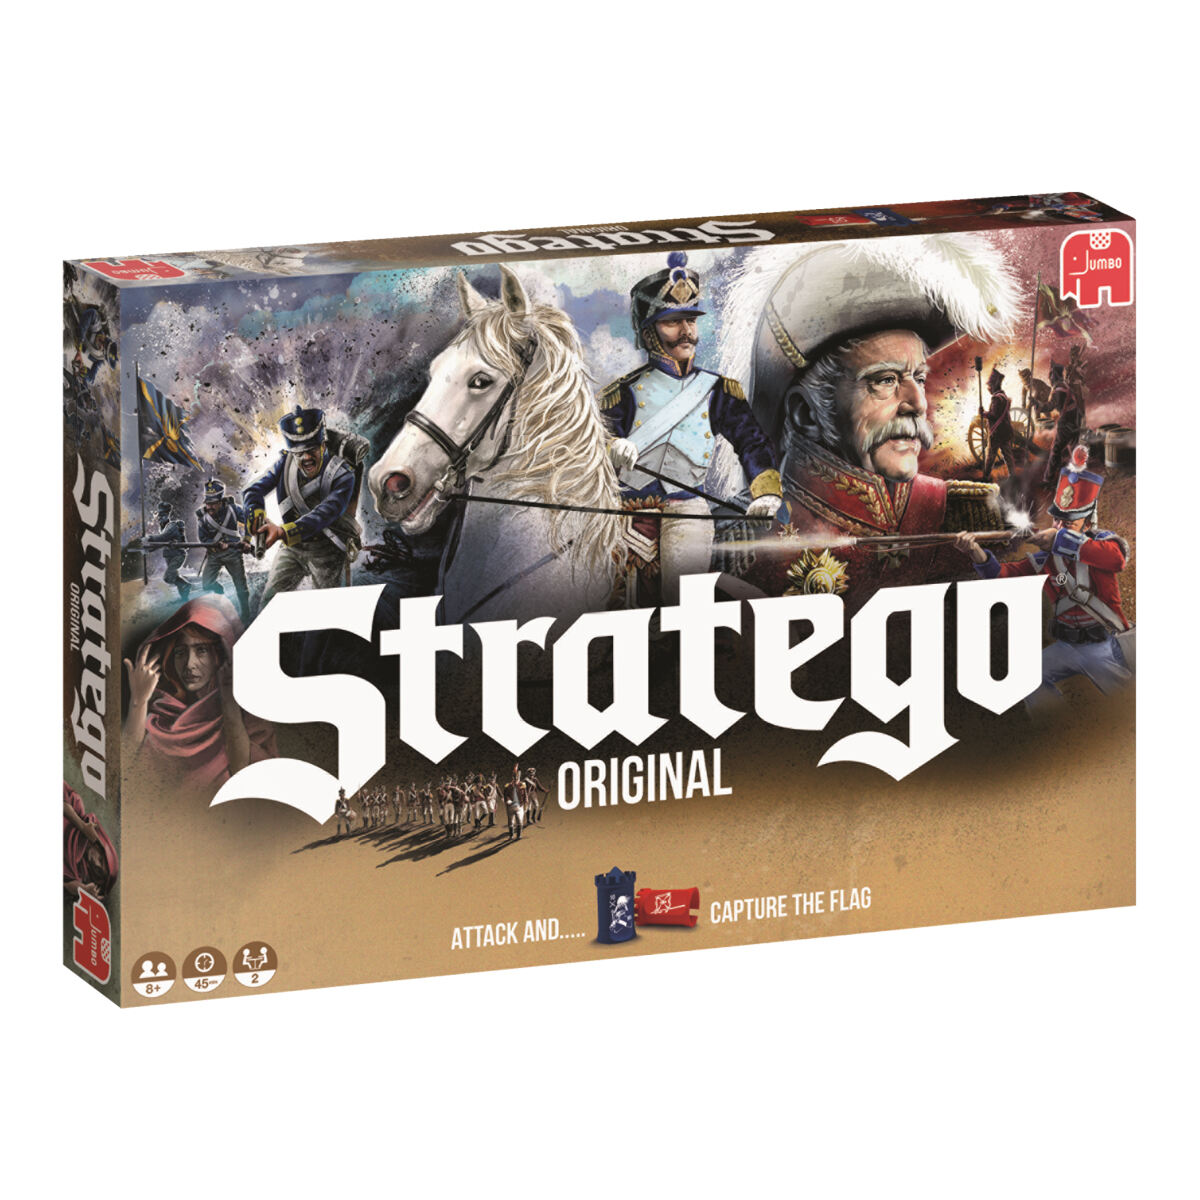 old stratego game